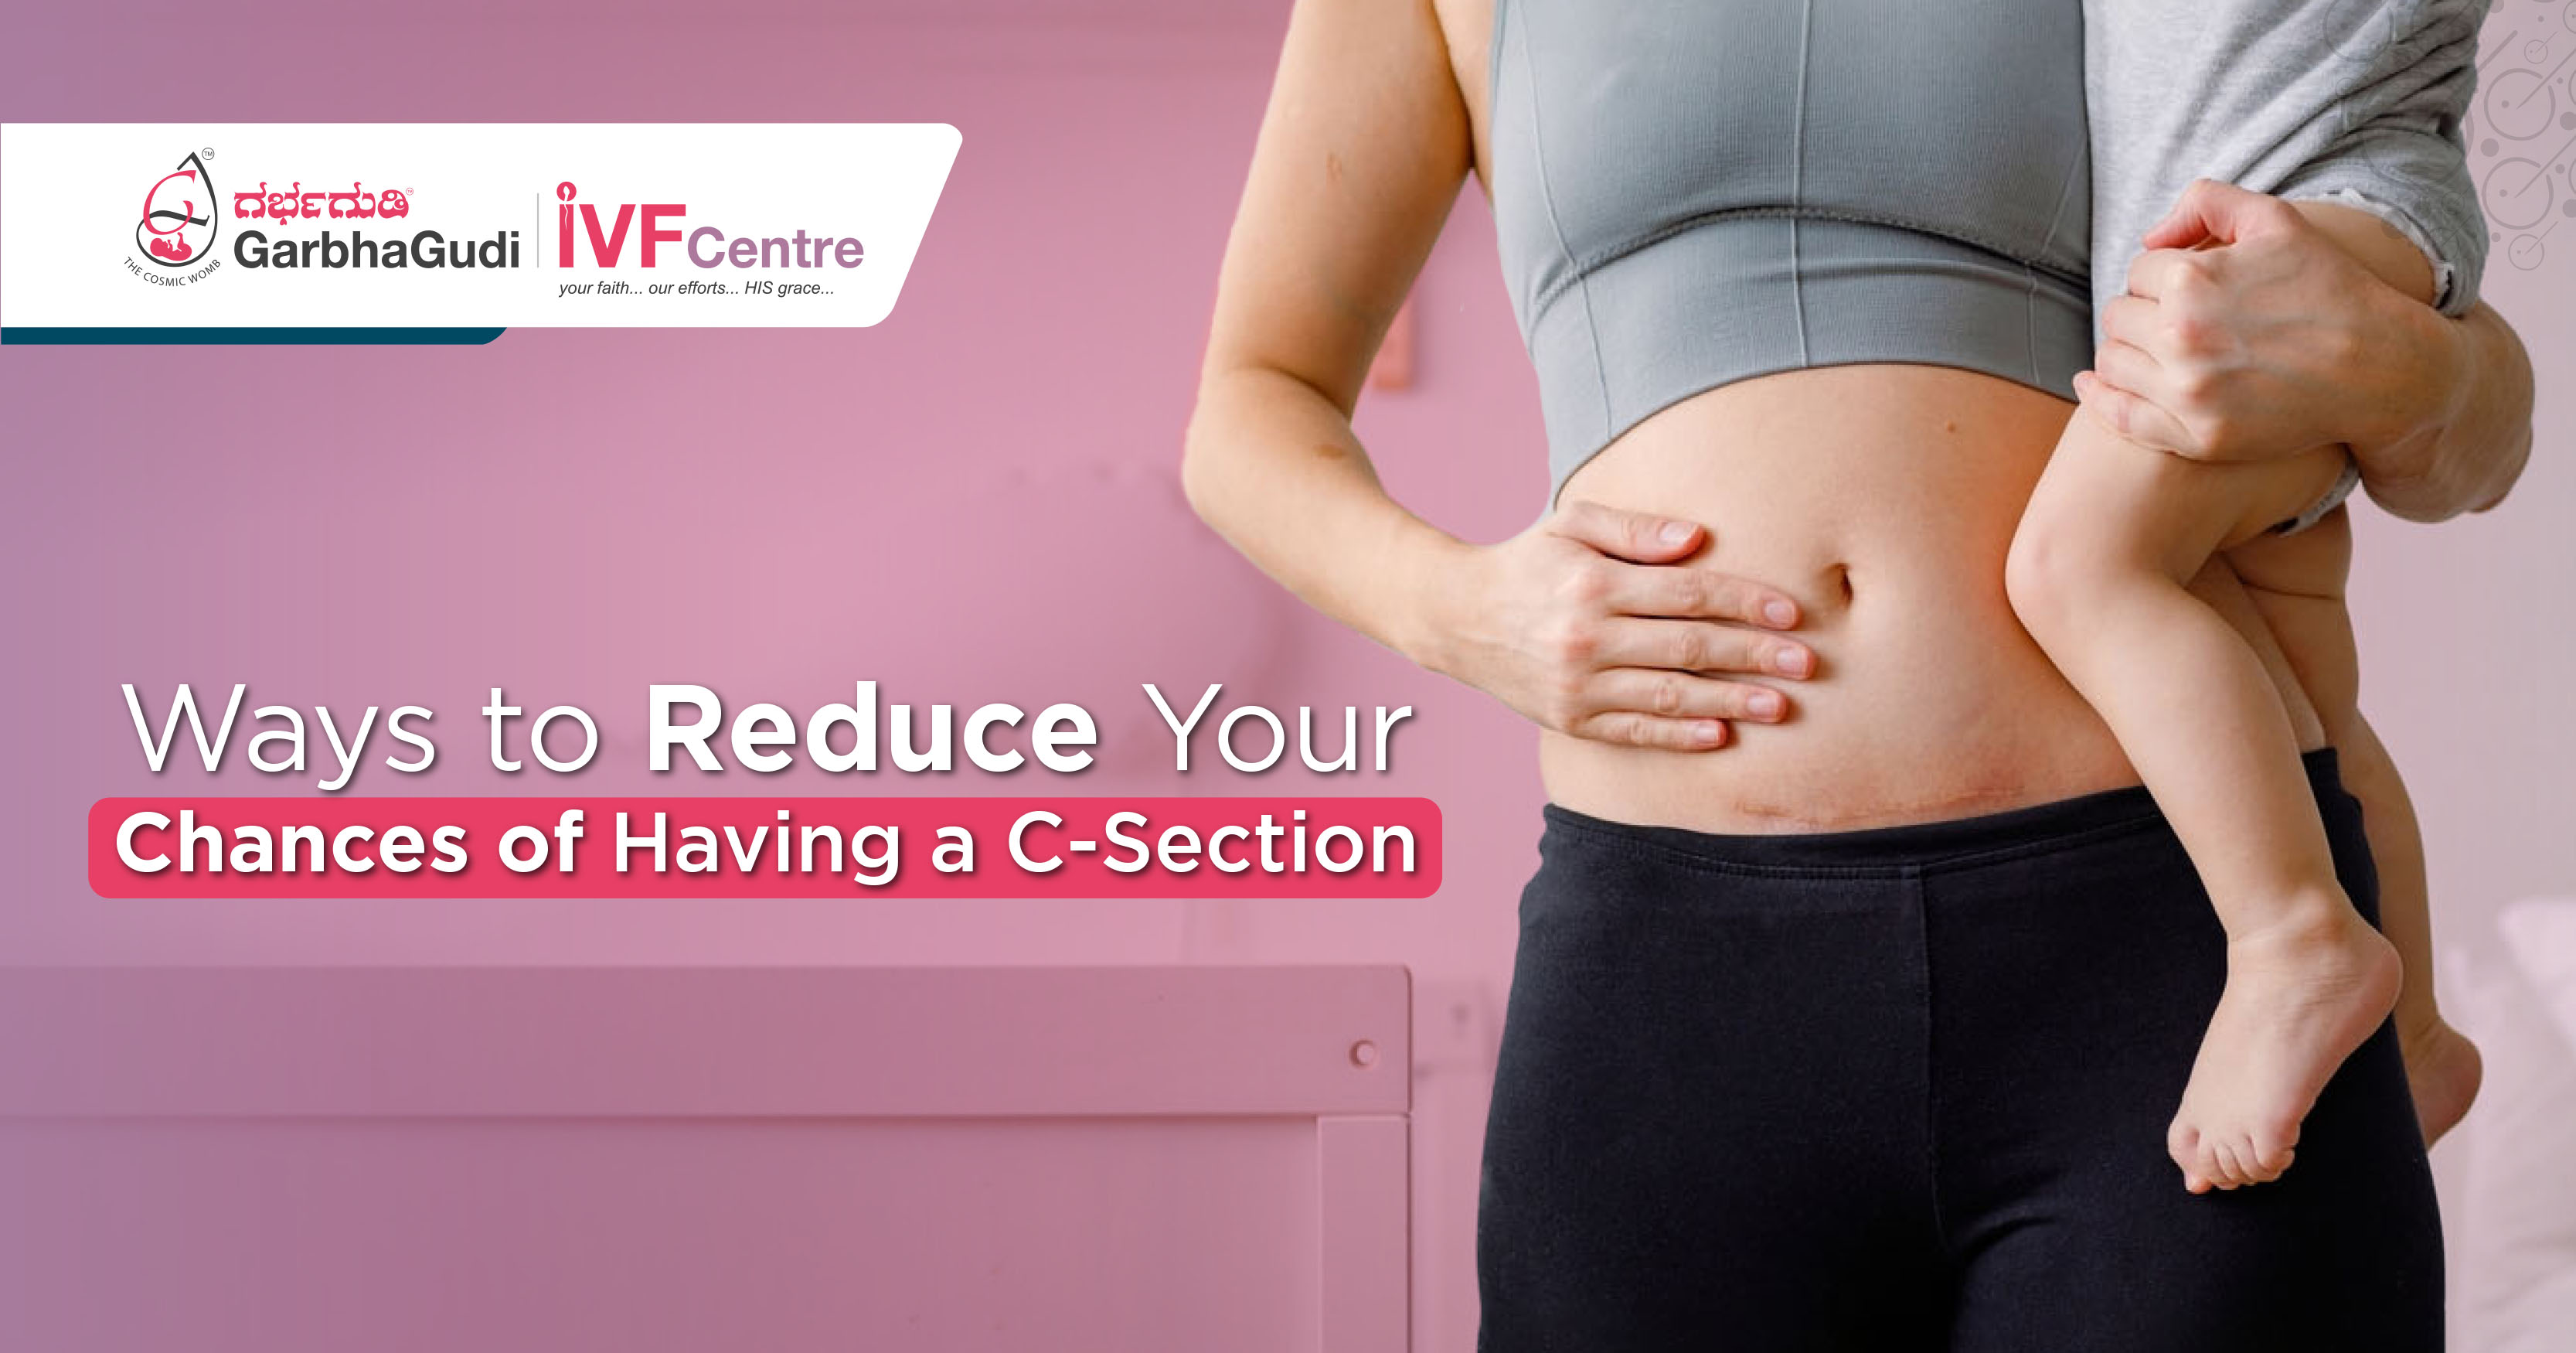 Ways to Reduce Your Chances of Having a C-Section